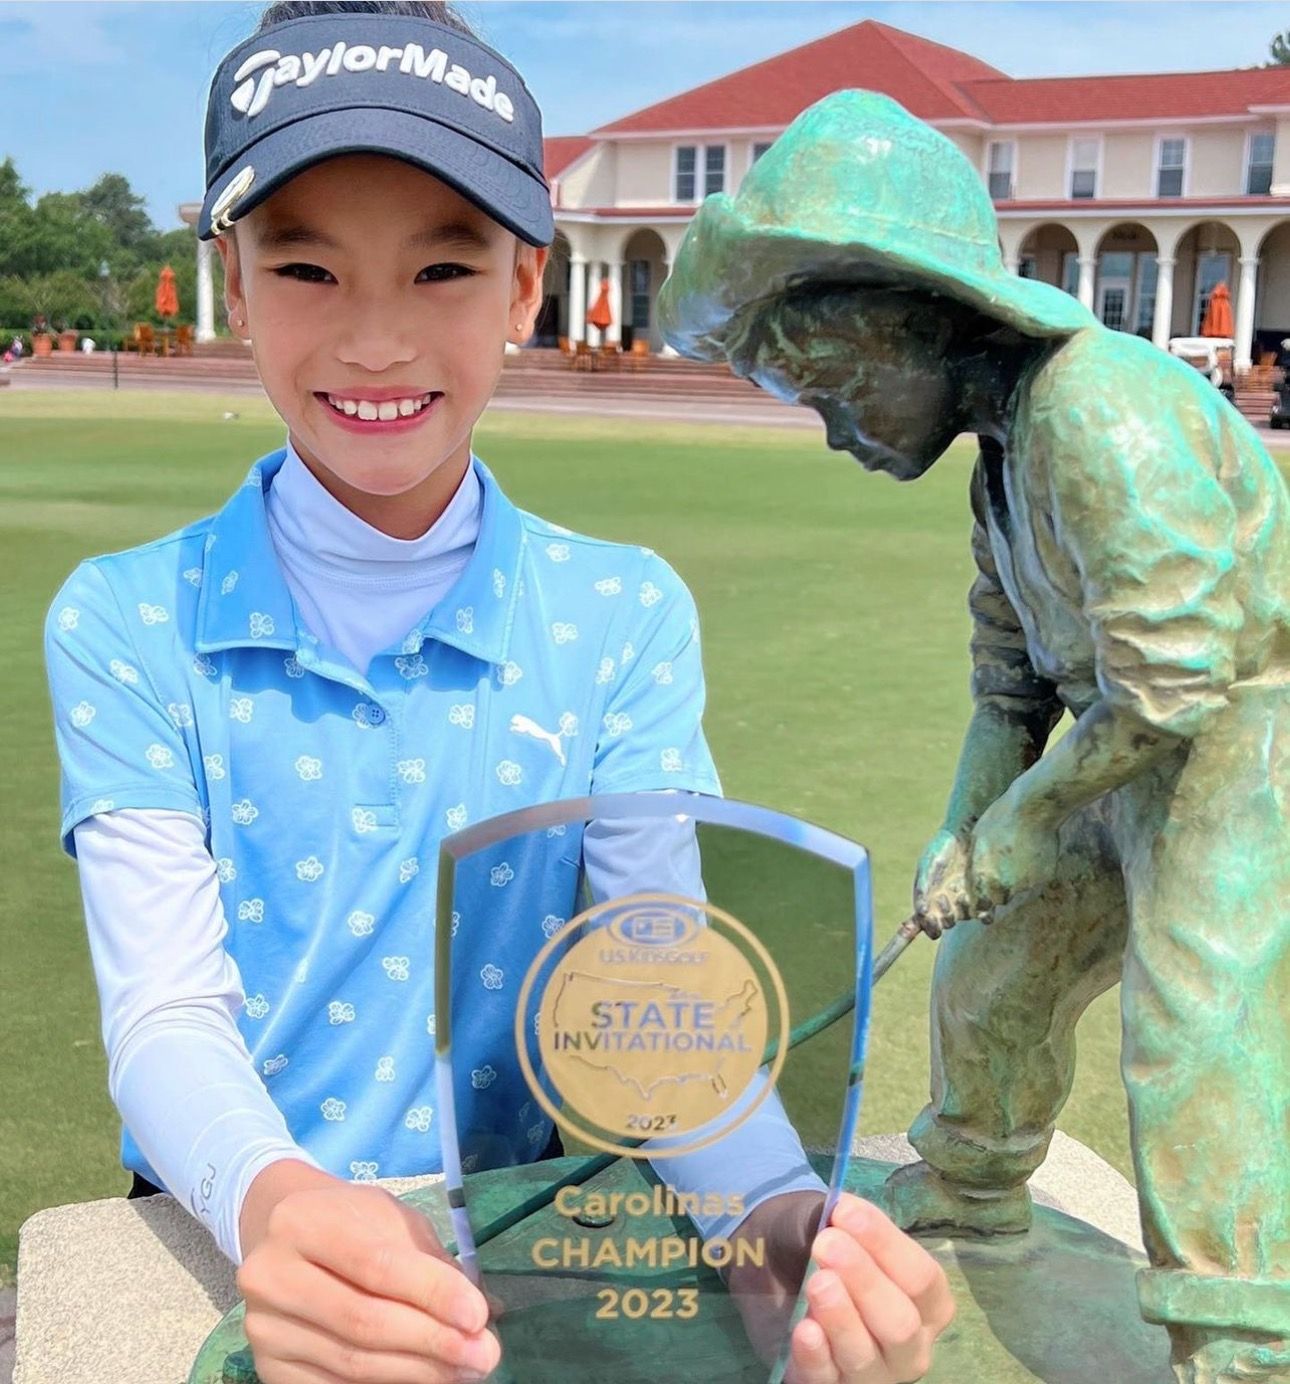 World ranked junior golfers and identical twin sisters, Catherine and Chloe Chen of Florida are in the News!